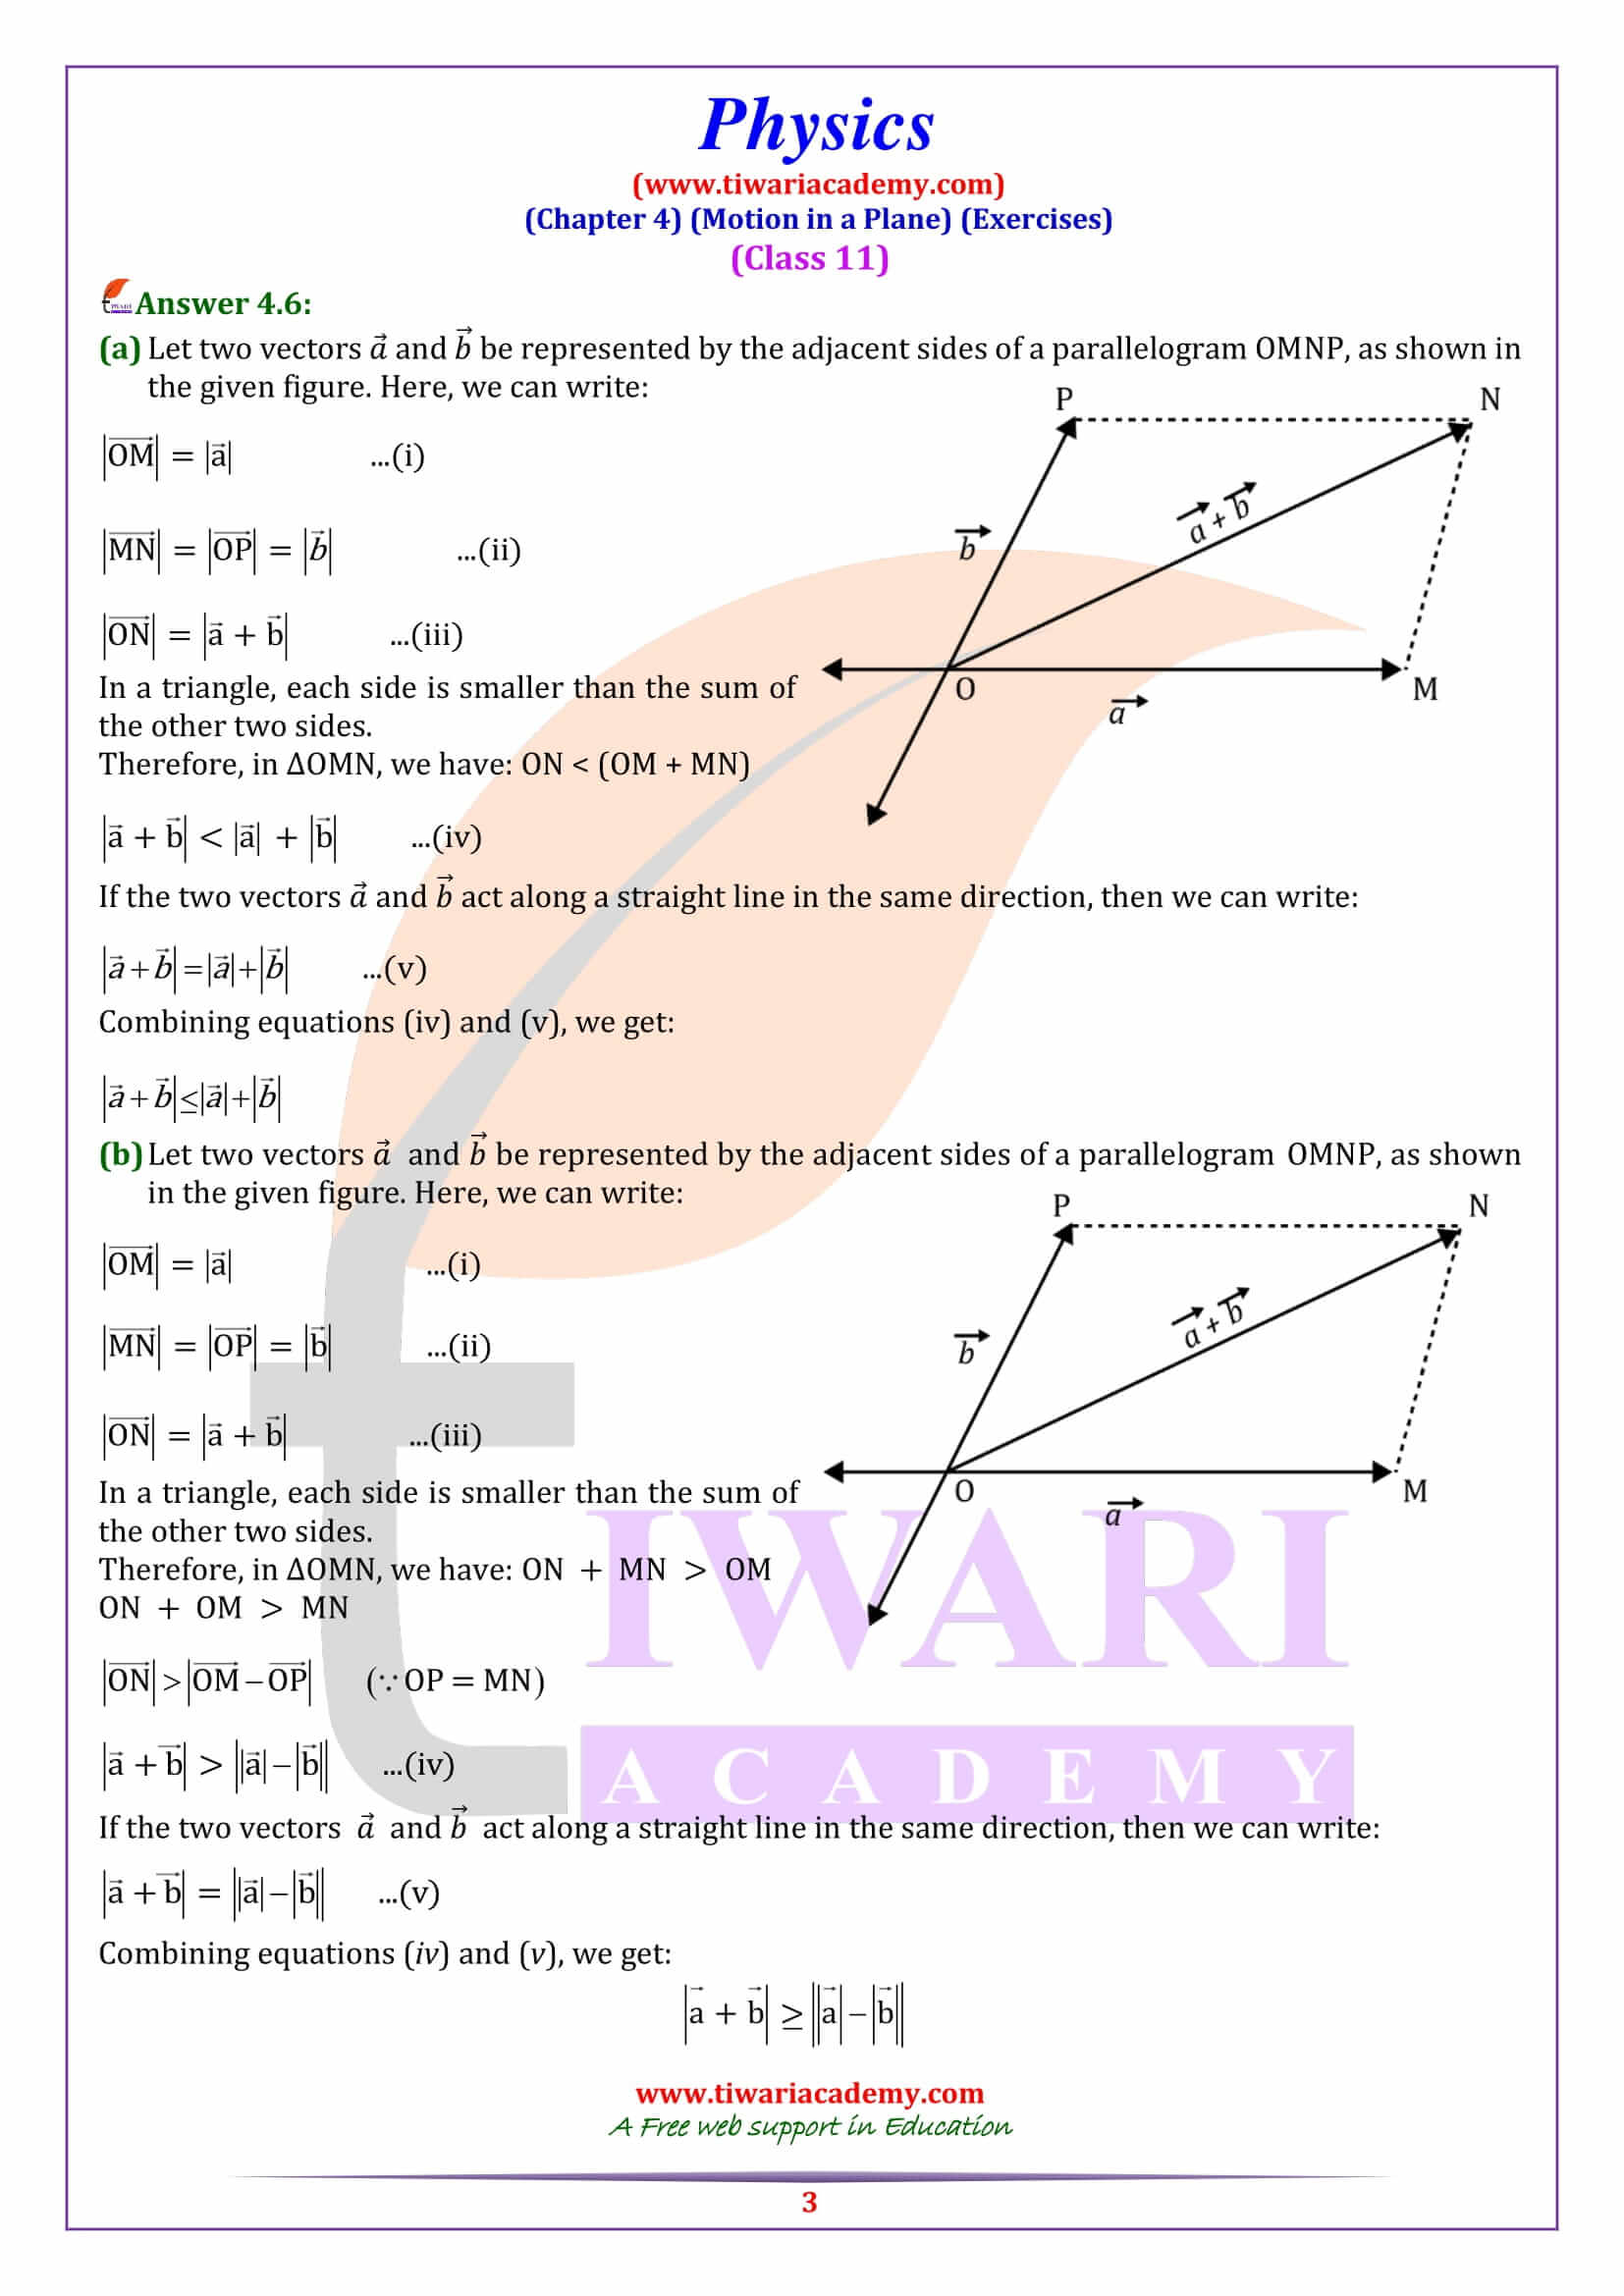 NCERT Solutions for Class 11 Physics Chapter 4 in English Medium